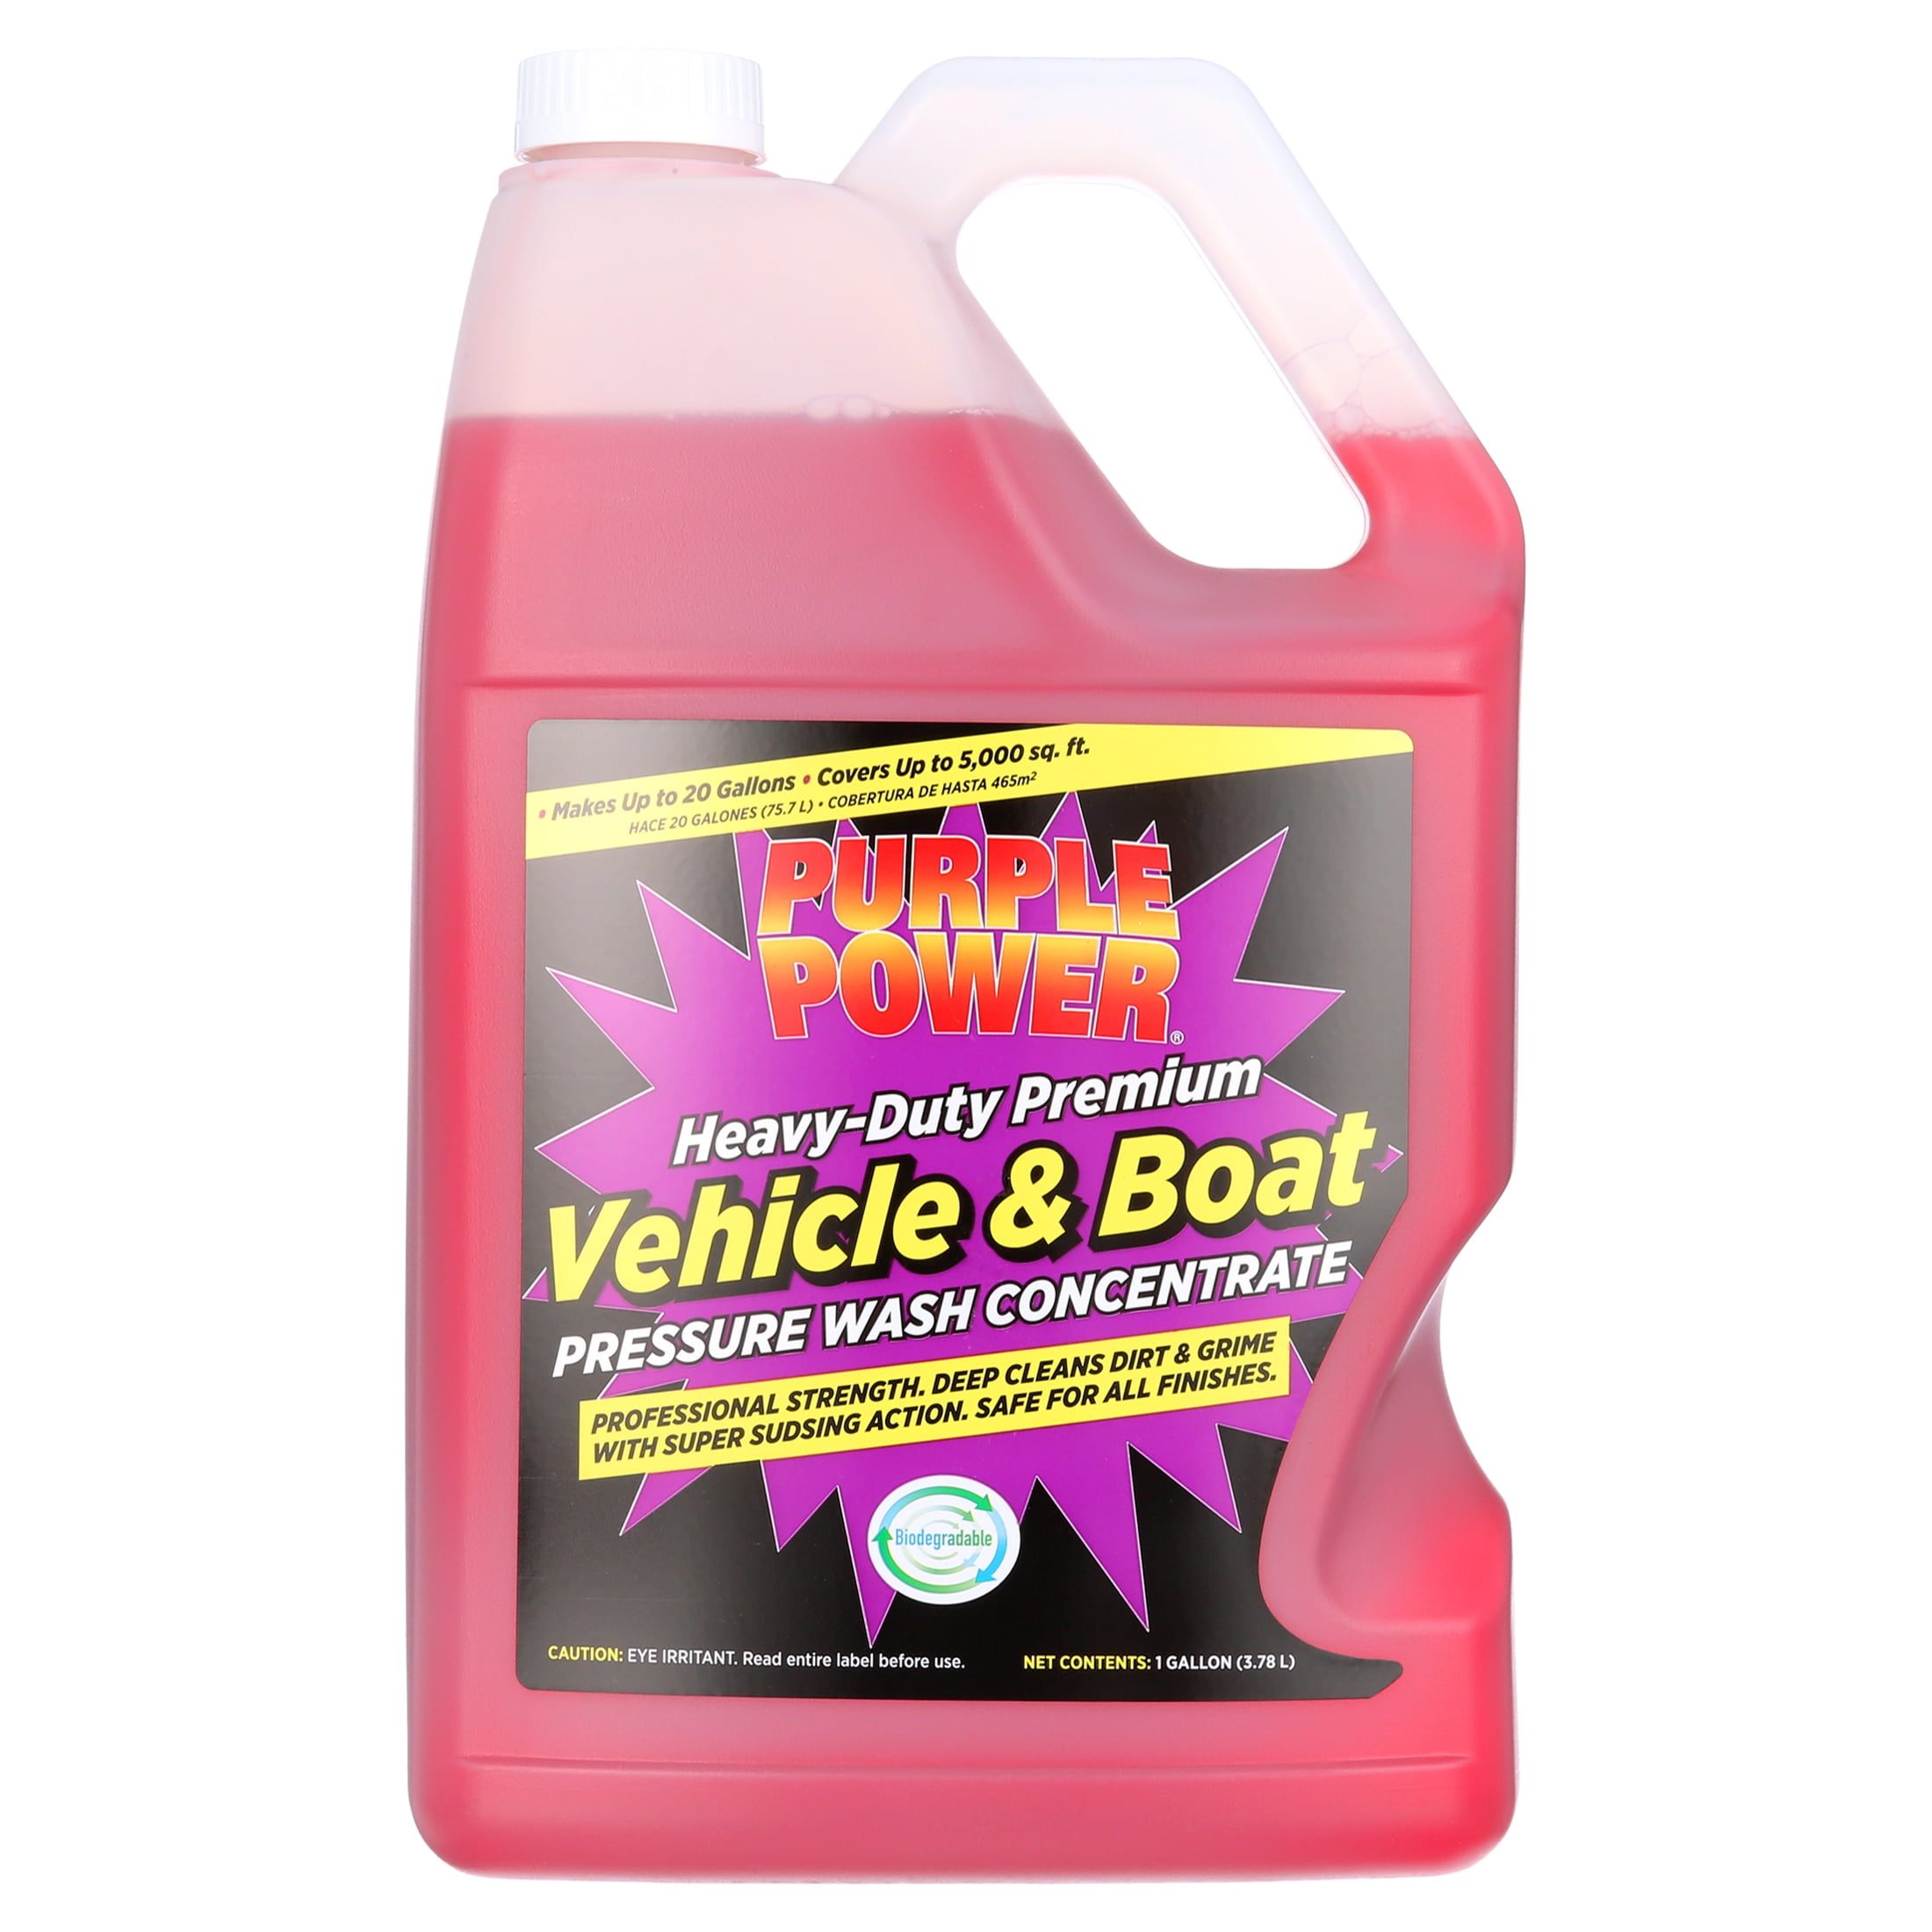 Products :: Engine :: Cleaners :: Kleen-Rite Ultimate ECD (Engine Cleaning  Detergent), gallon (4/case) - Run-Rite Professional Car Care Products